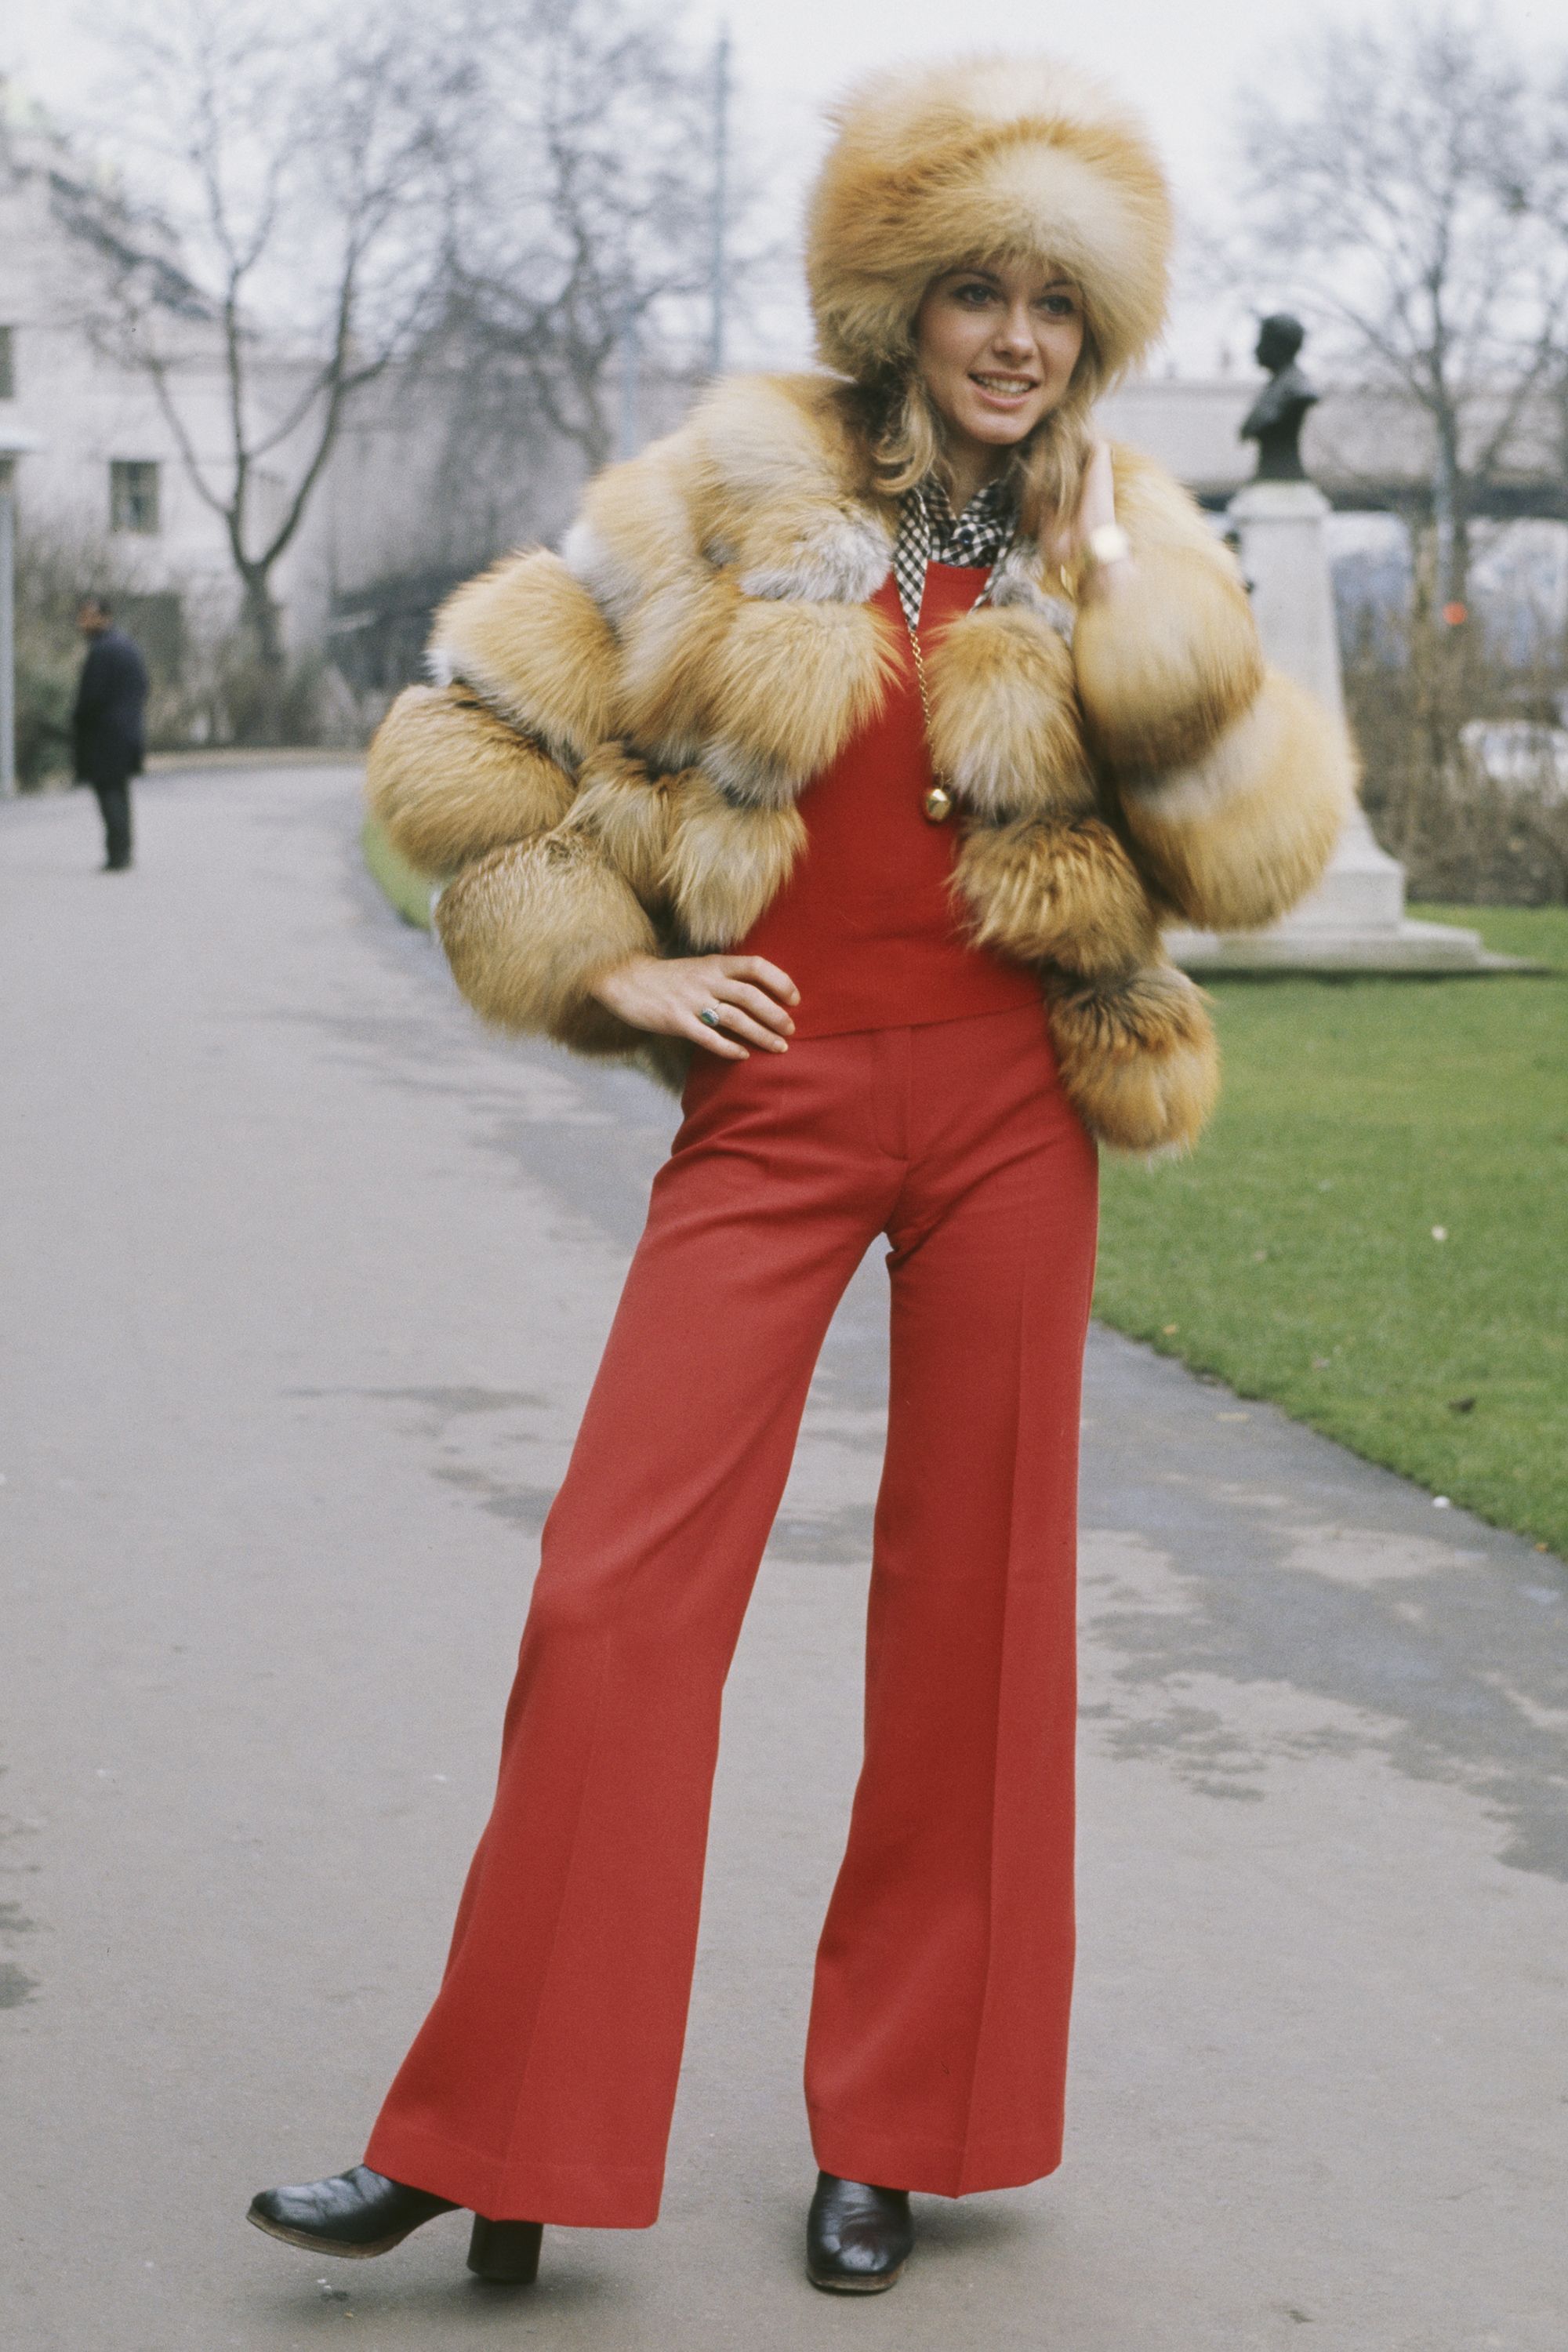 70s winter outfits